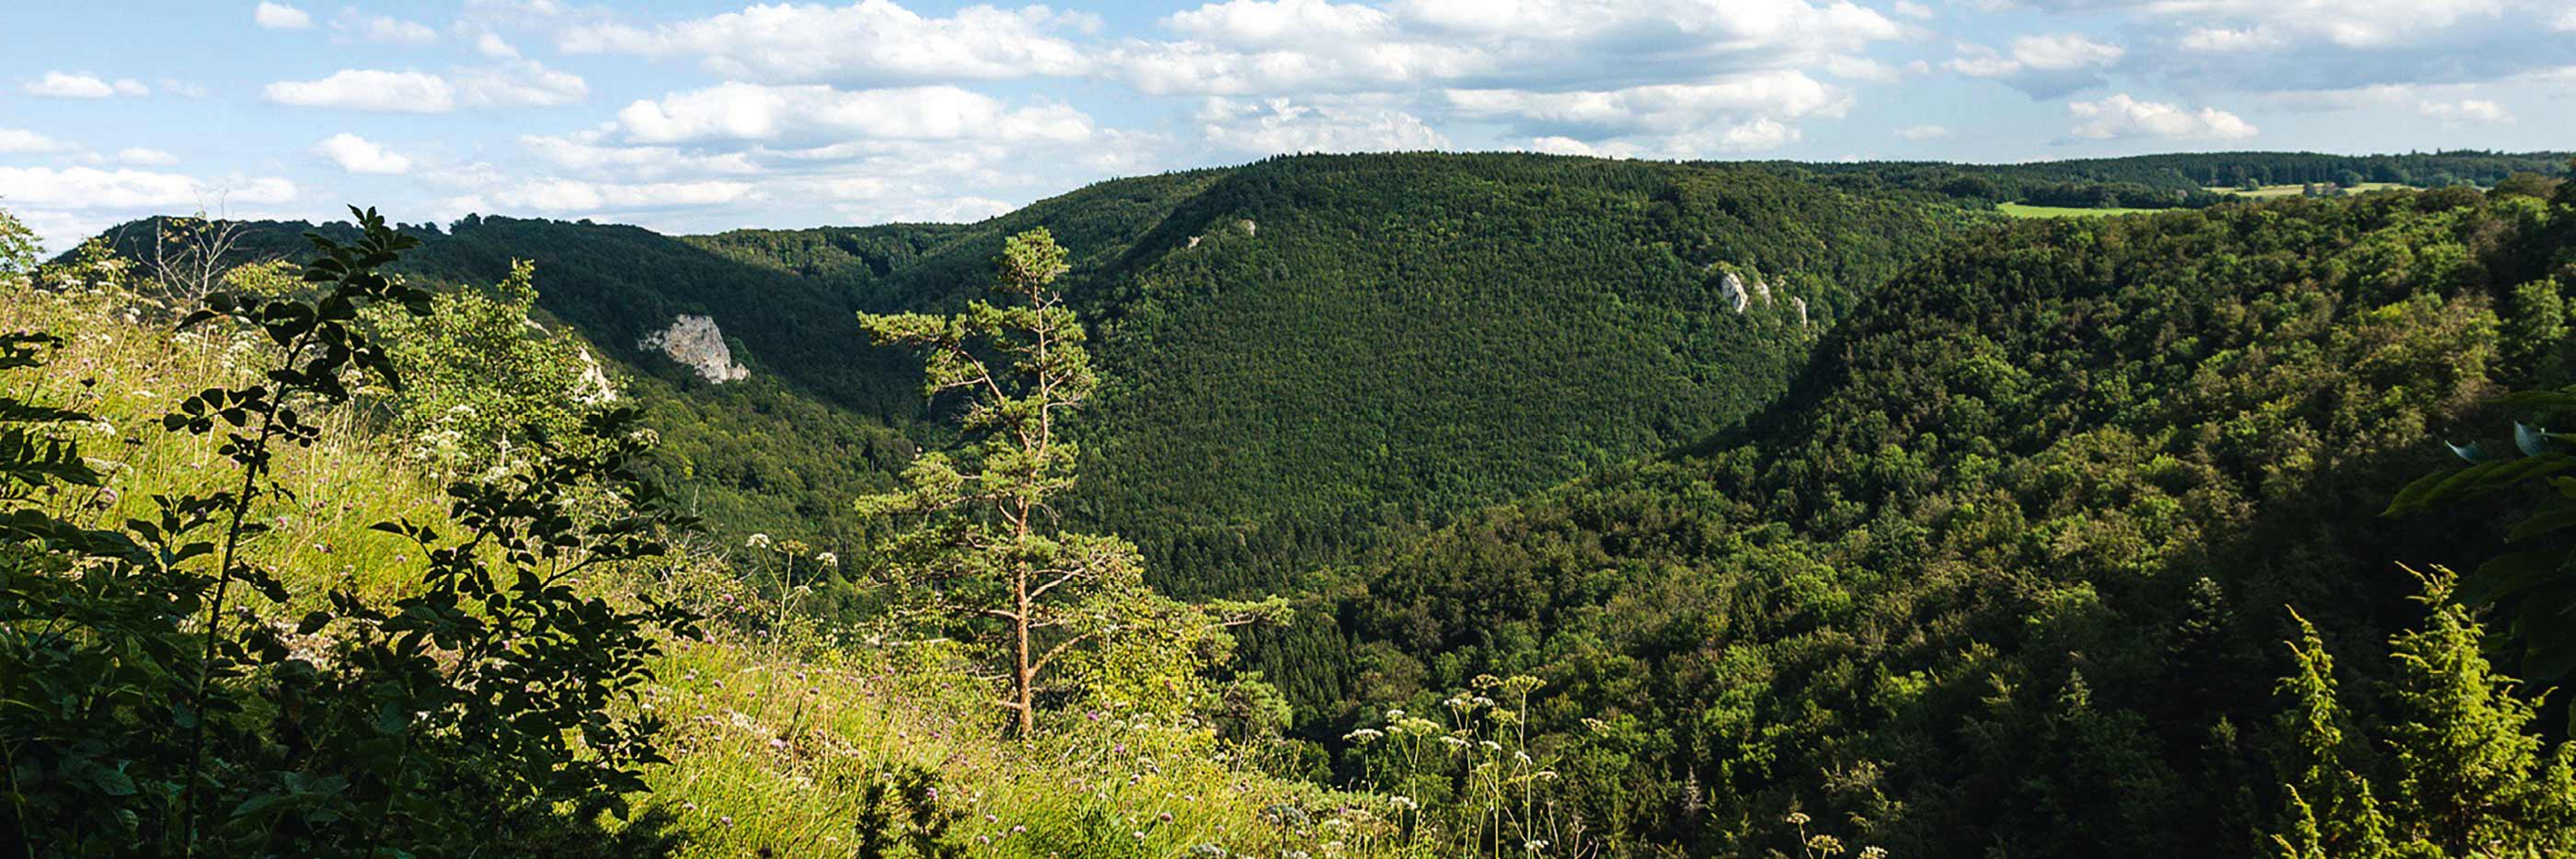 Swabian Jura in the spring with a single, young tree in the foreground | mey®